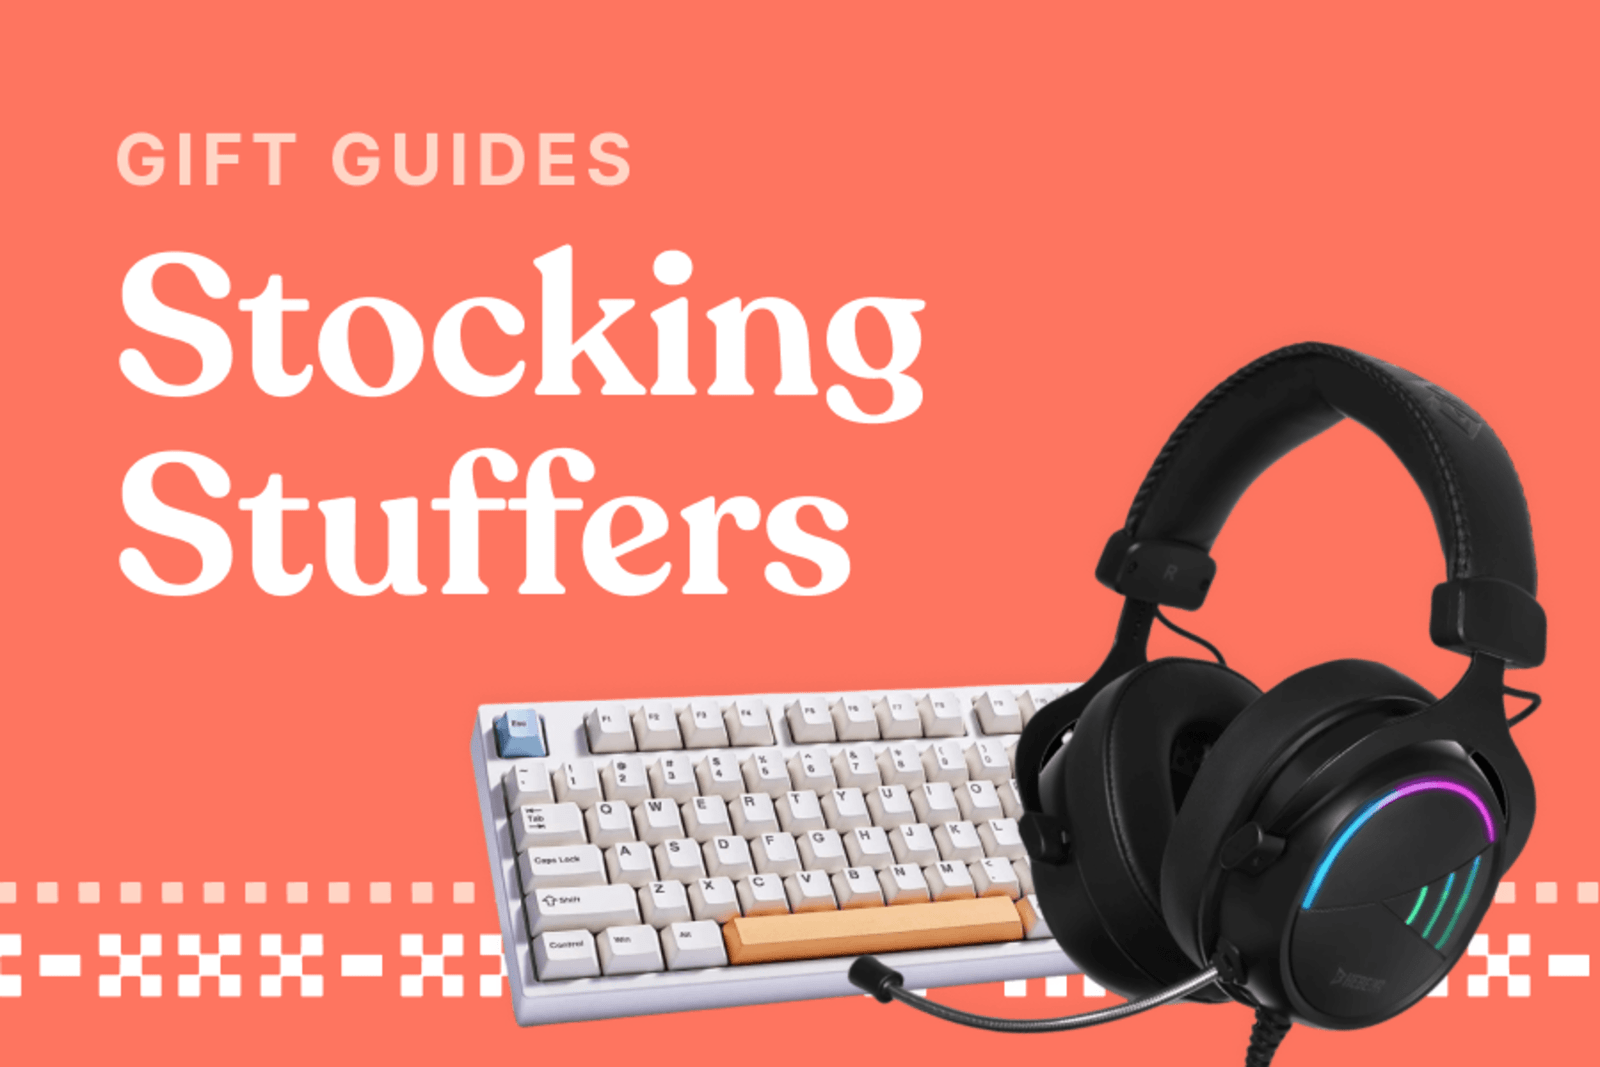 The Ultimate Stocking Stuffers for PC Gamers